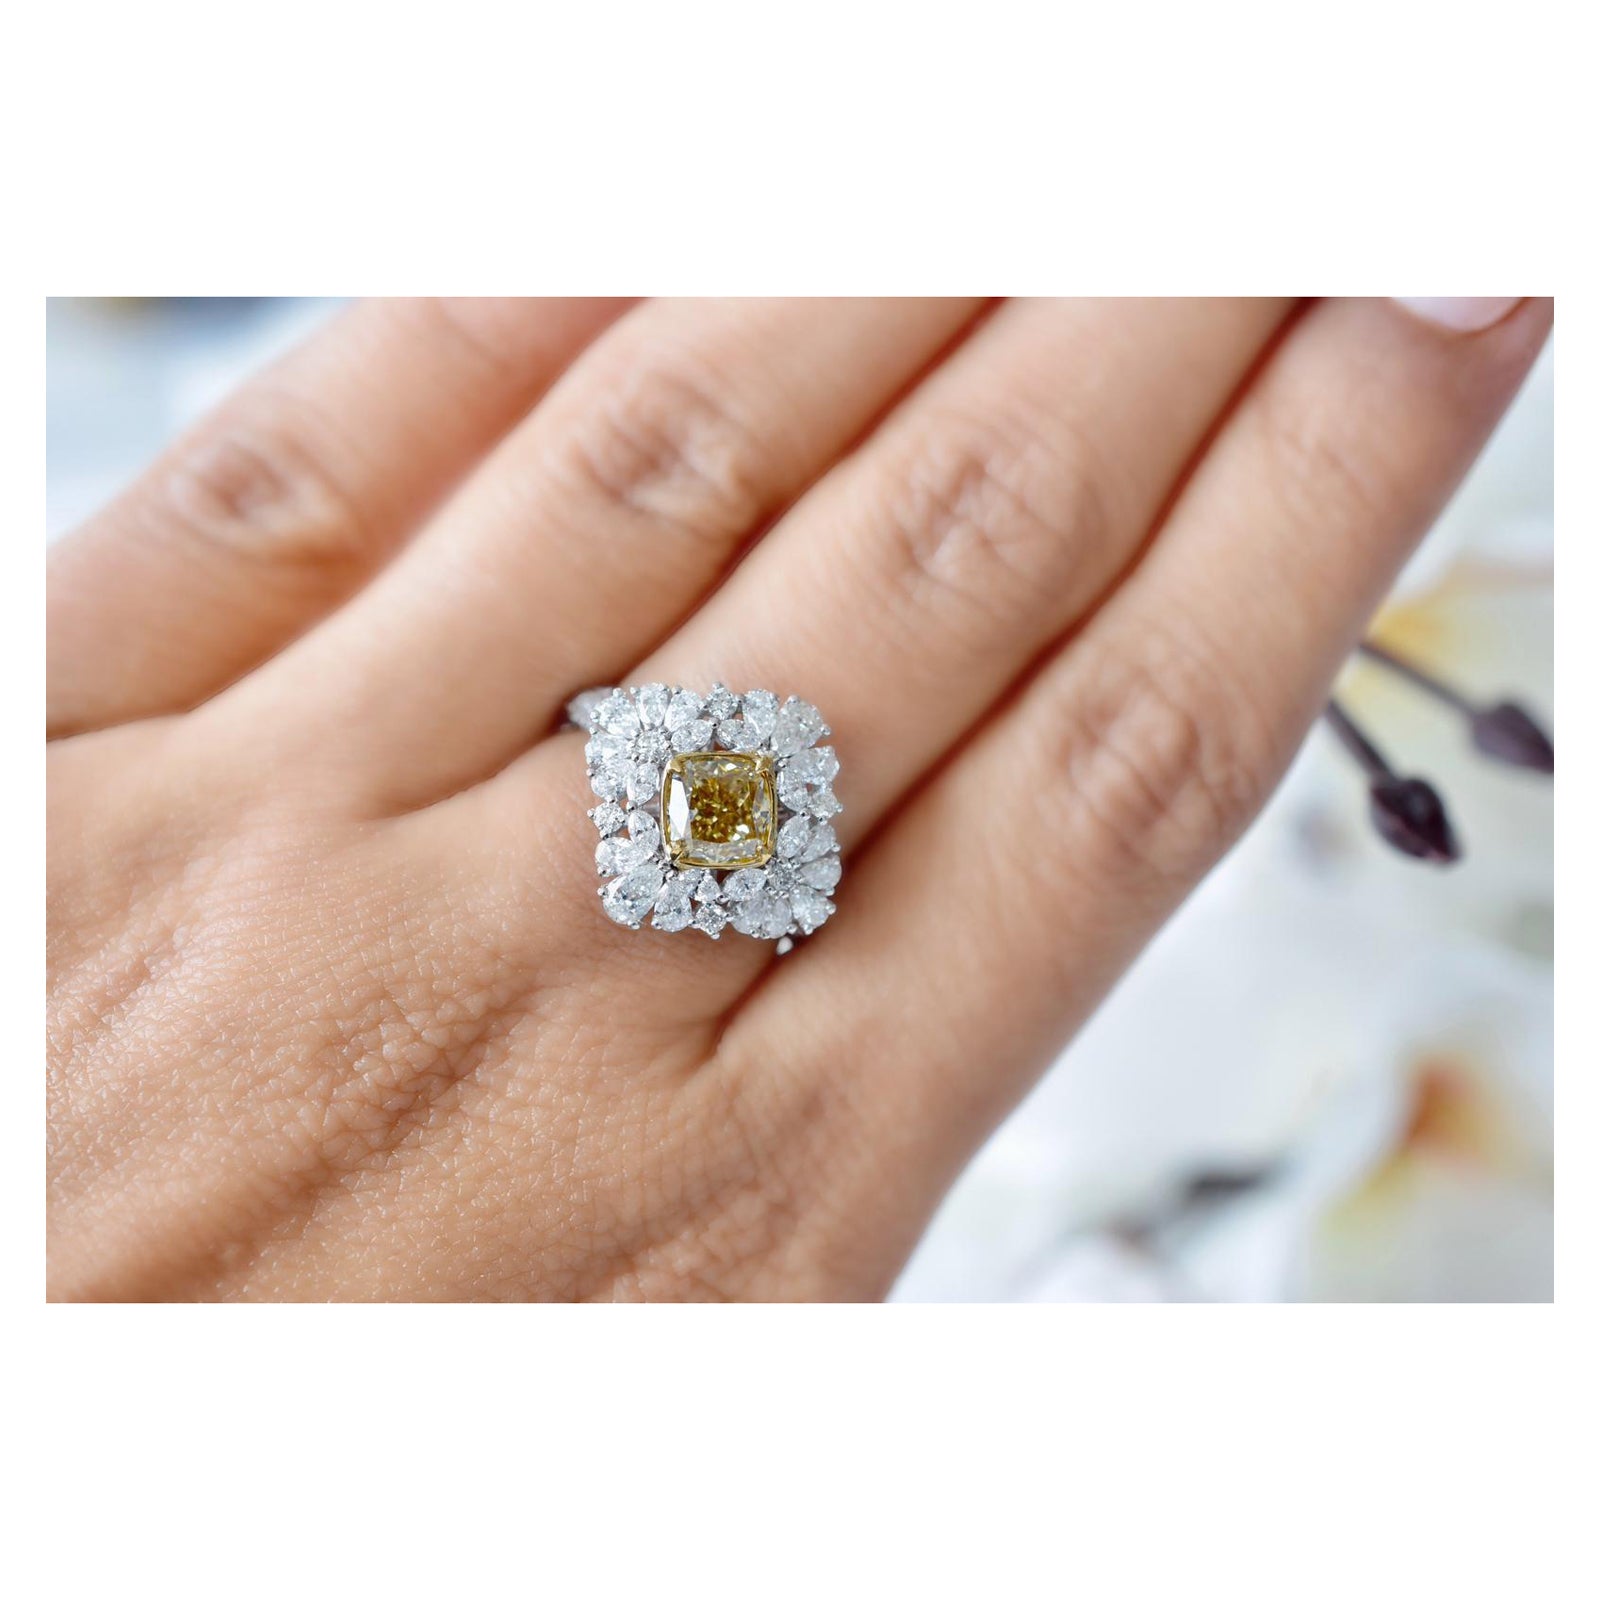 1.12 Carat Fancy Brownish Yellow Diamond Ring VVS1 Clarity GIA certified For Sale